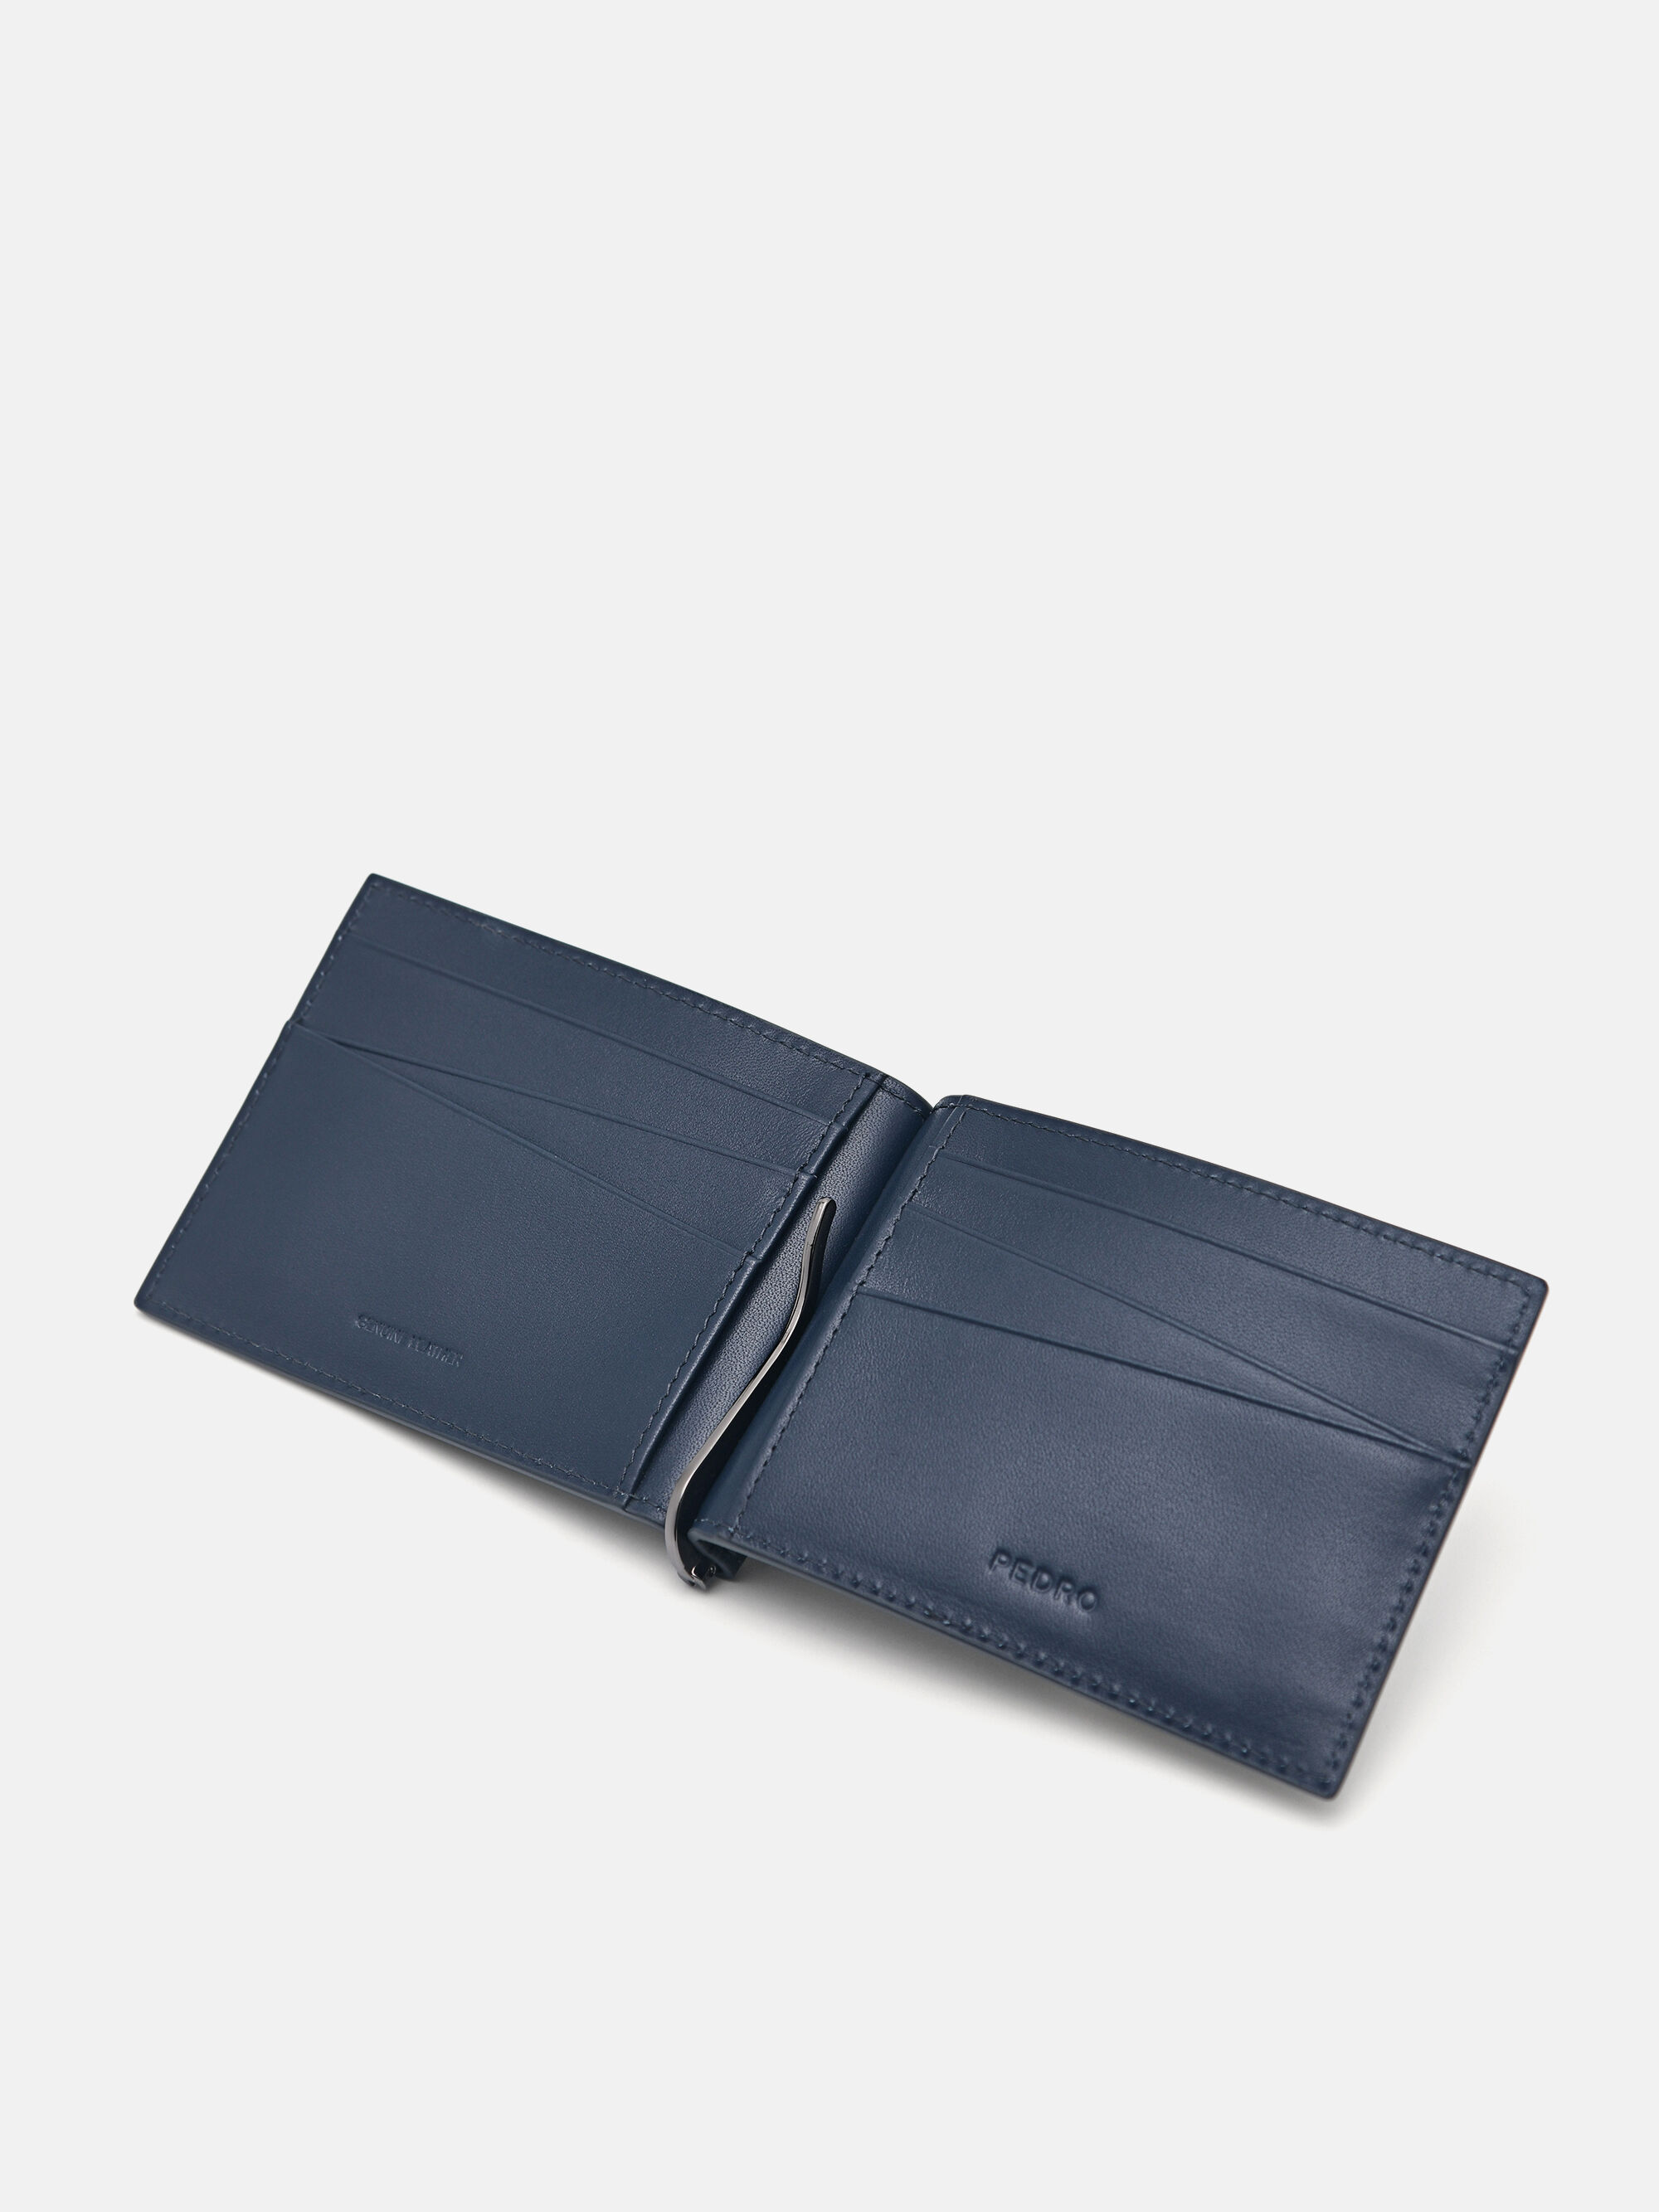 Leather Bi-Fold Card Holder with Money Clip, Navy